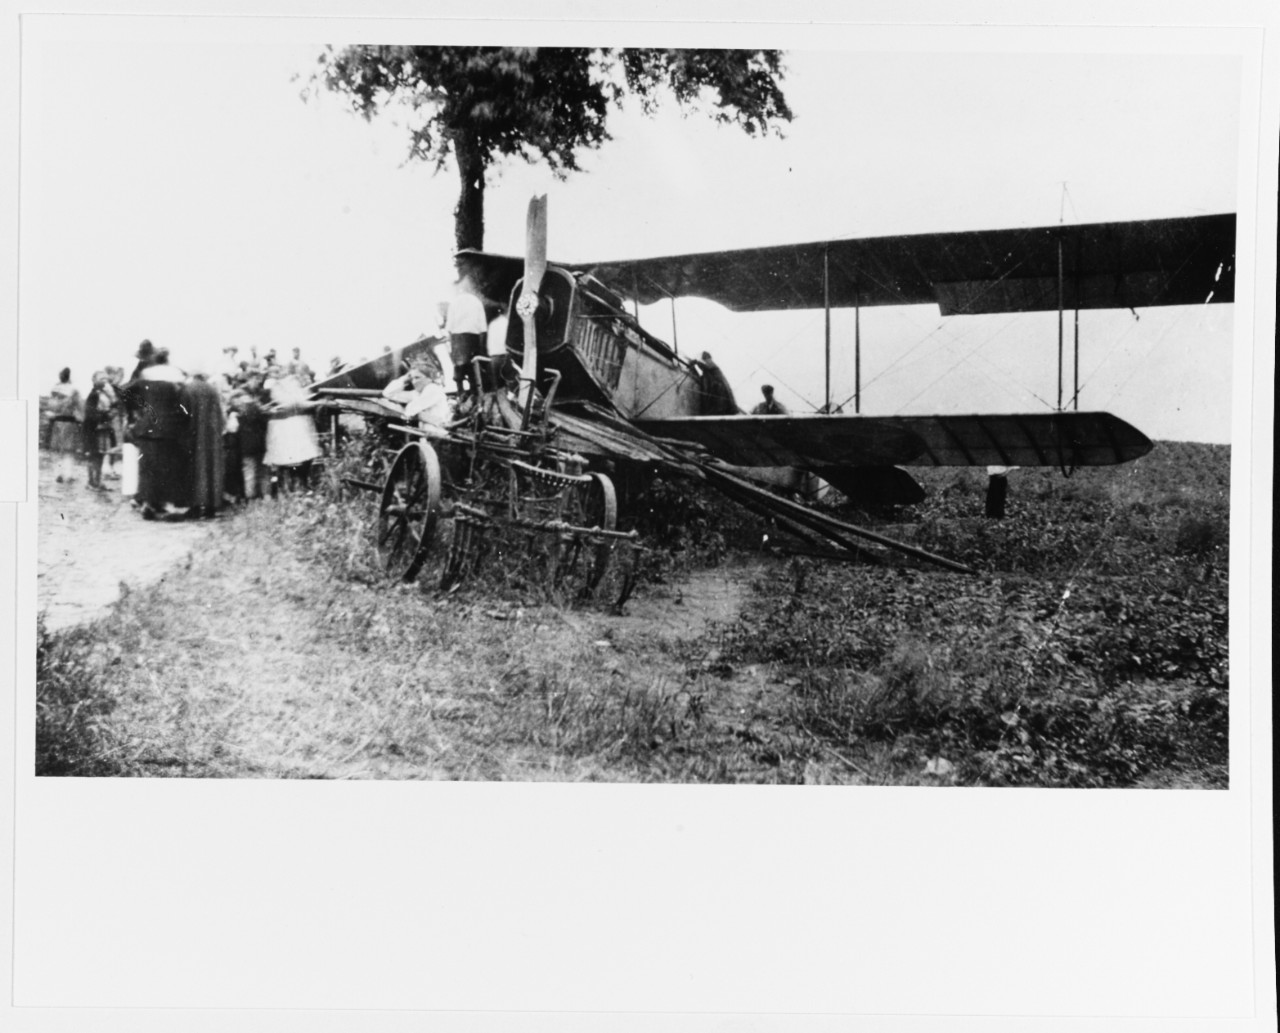 Wrecked Curtiss "JN" type airplane